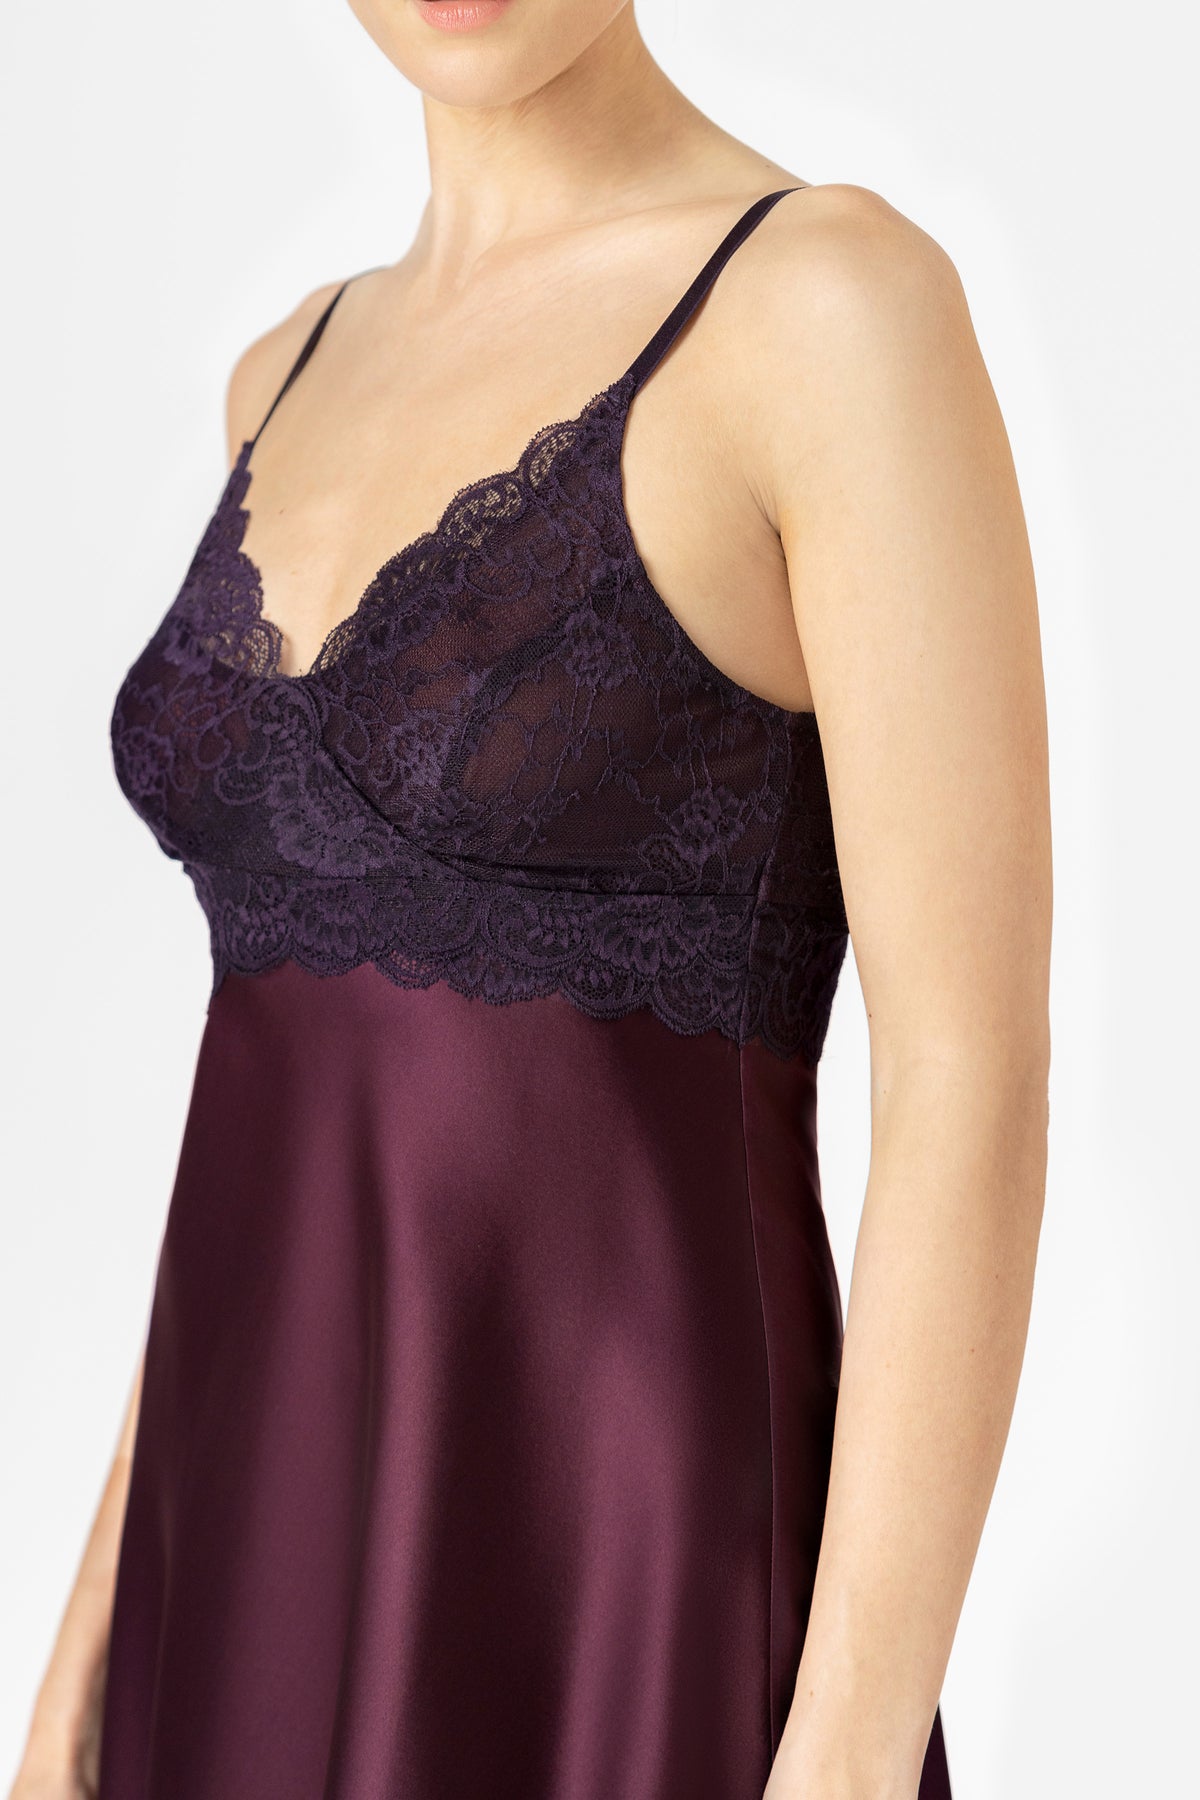 ARDENE LUSH BUST SUPPORT CROSS OVER SILK CHEMISE – Expect Lace